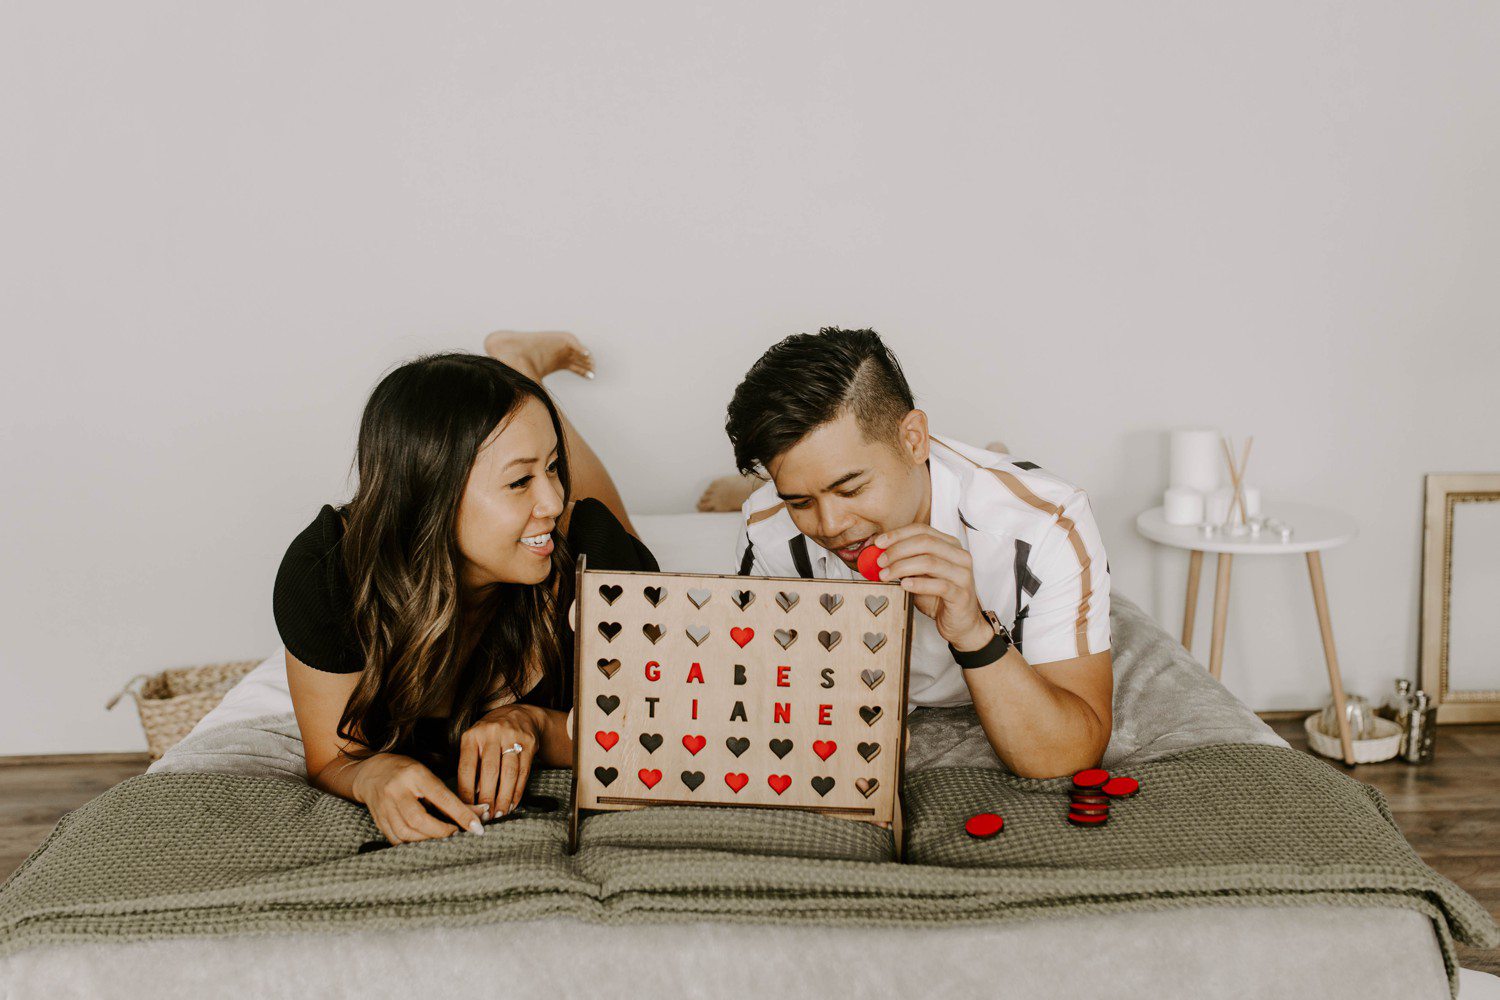 Connect 4 Board Game Engagement Photos